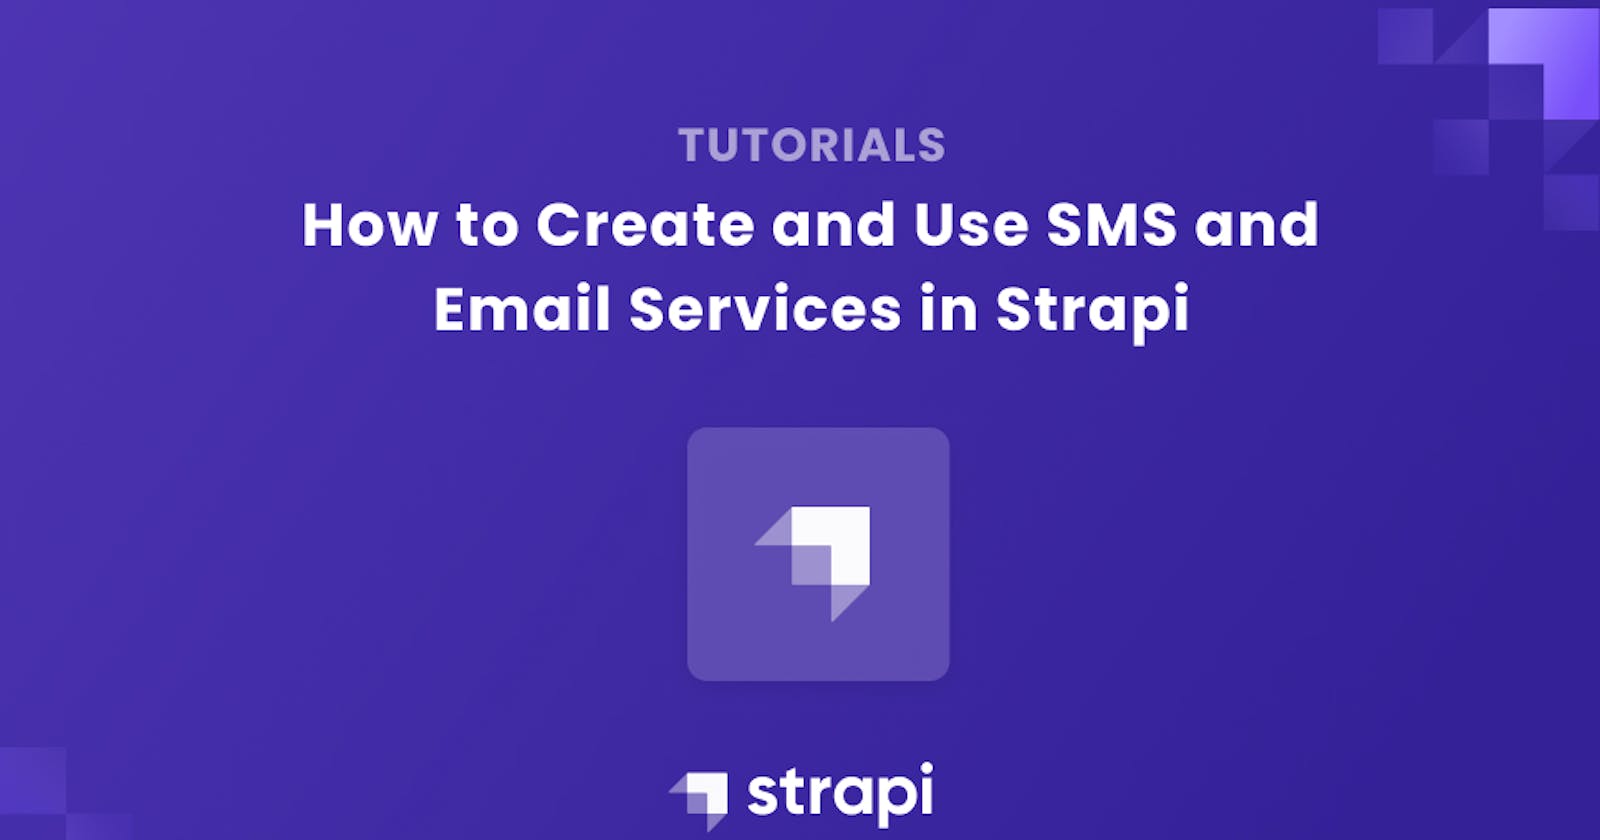 How to Create and Use SMS and Email Services in Strapi